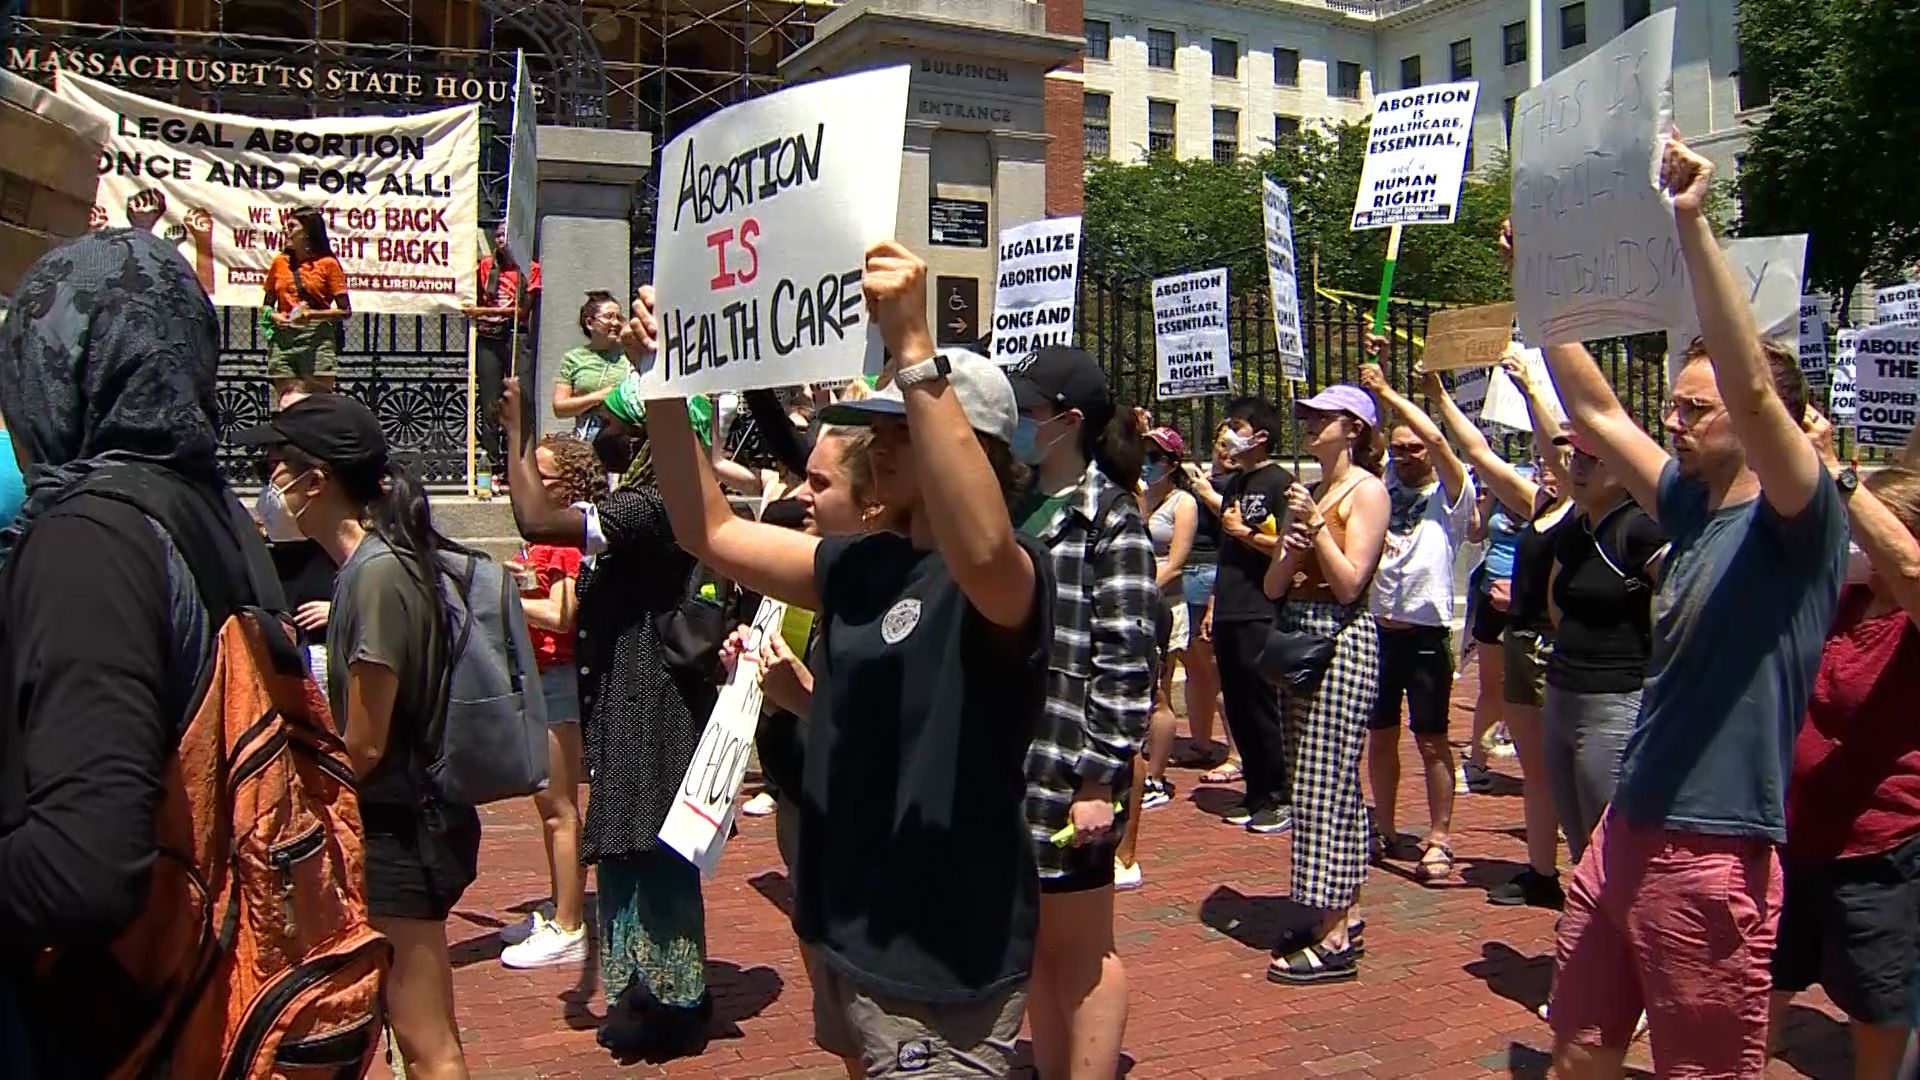 Rallies continue in Boston following Supreme Court's decision on abortion